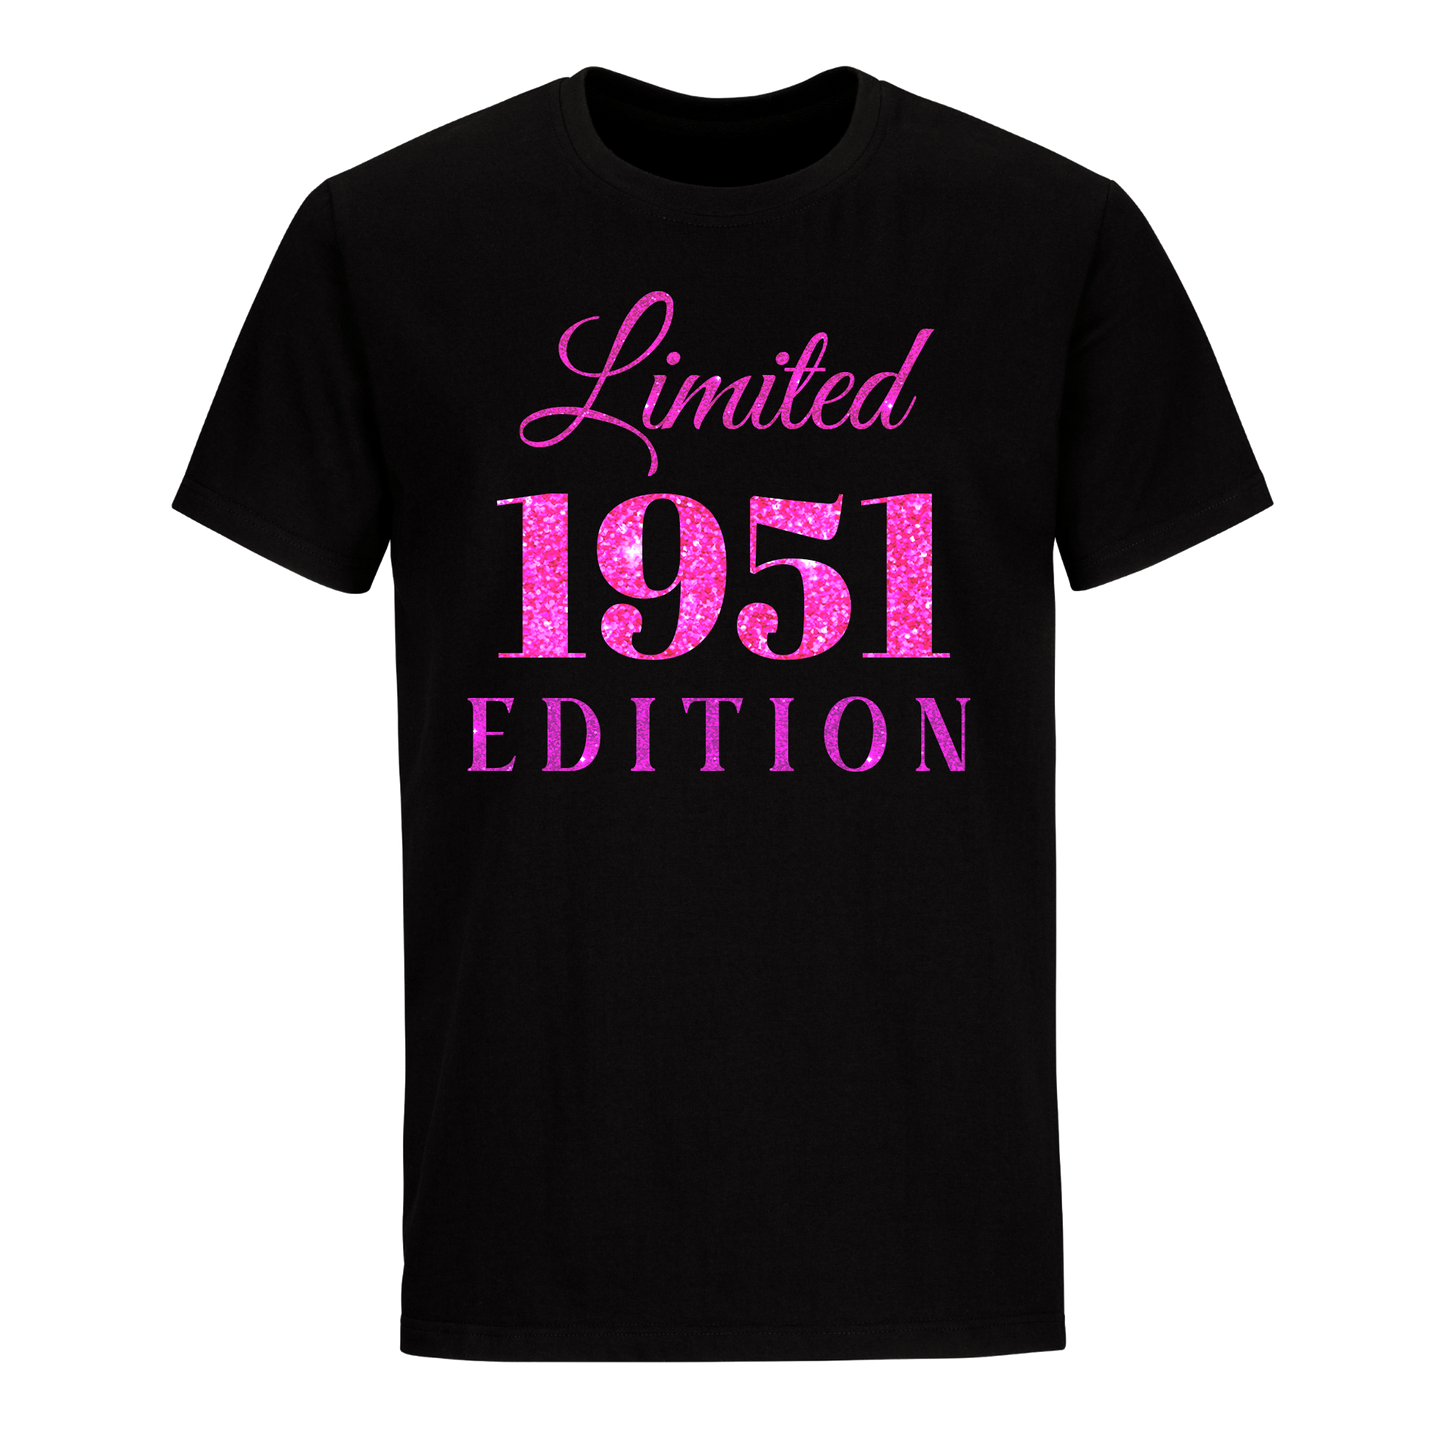 LIMITED EDITION 1951 FRONT AND BACK DESIGN UNISEX SHIRT